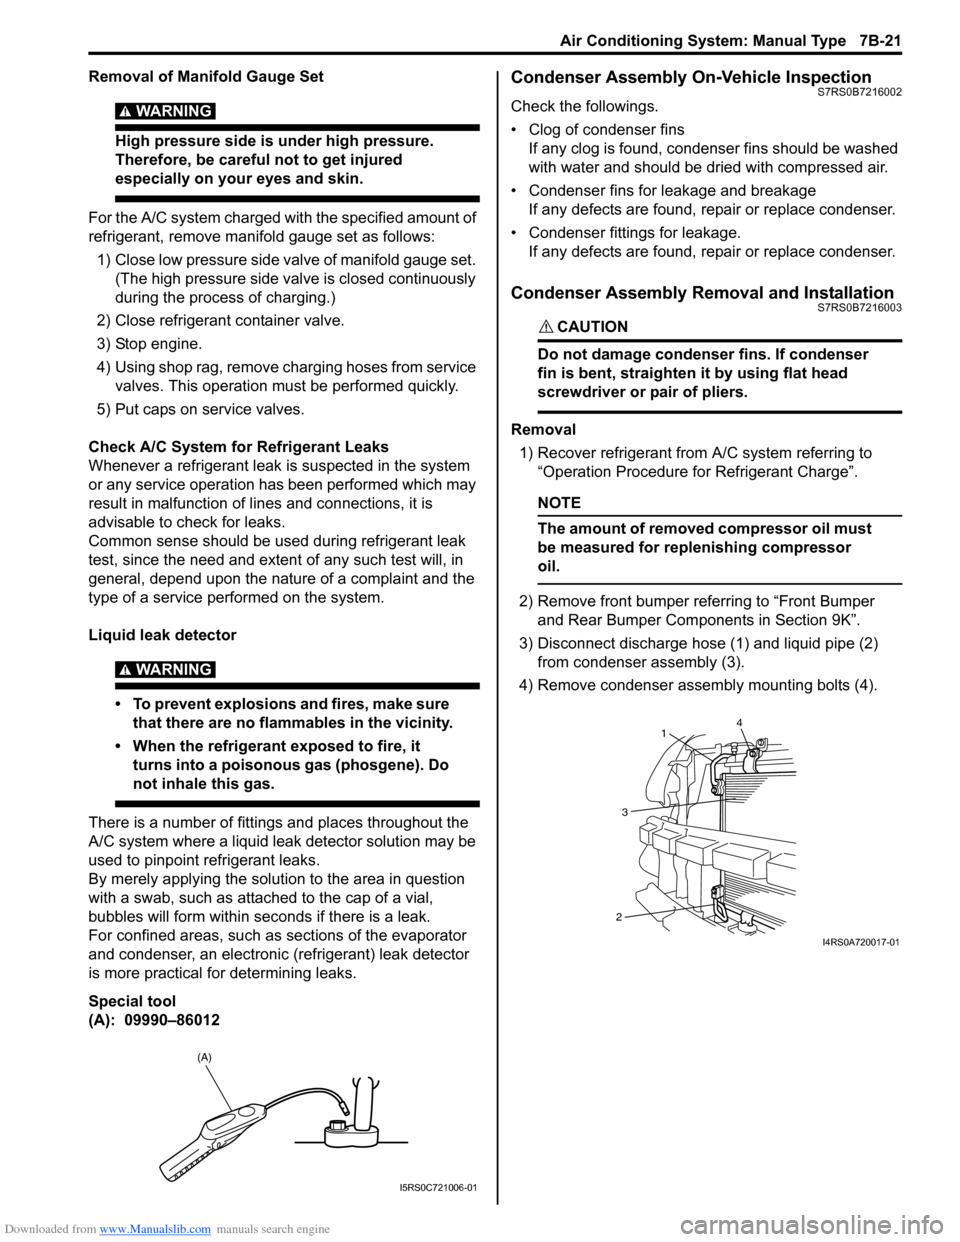 SUZUKI SWIFT 2008 2.G Service Workshop Manual Downloaded from www.Manualslib.com manuals search engine Air Conditioning System: Manual Type 7B-21
Removal of Manifold Gauge Set
WARNING! 
High pressure side is under high pressure. 
Therefore, be ca